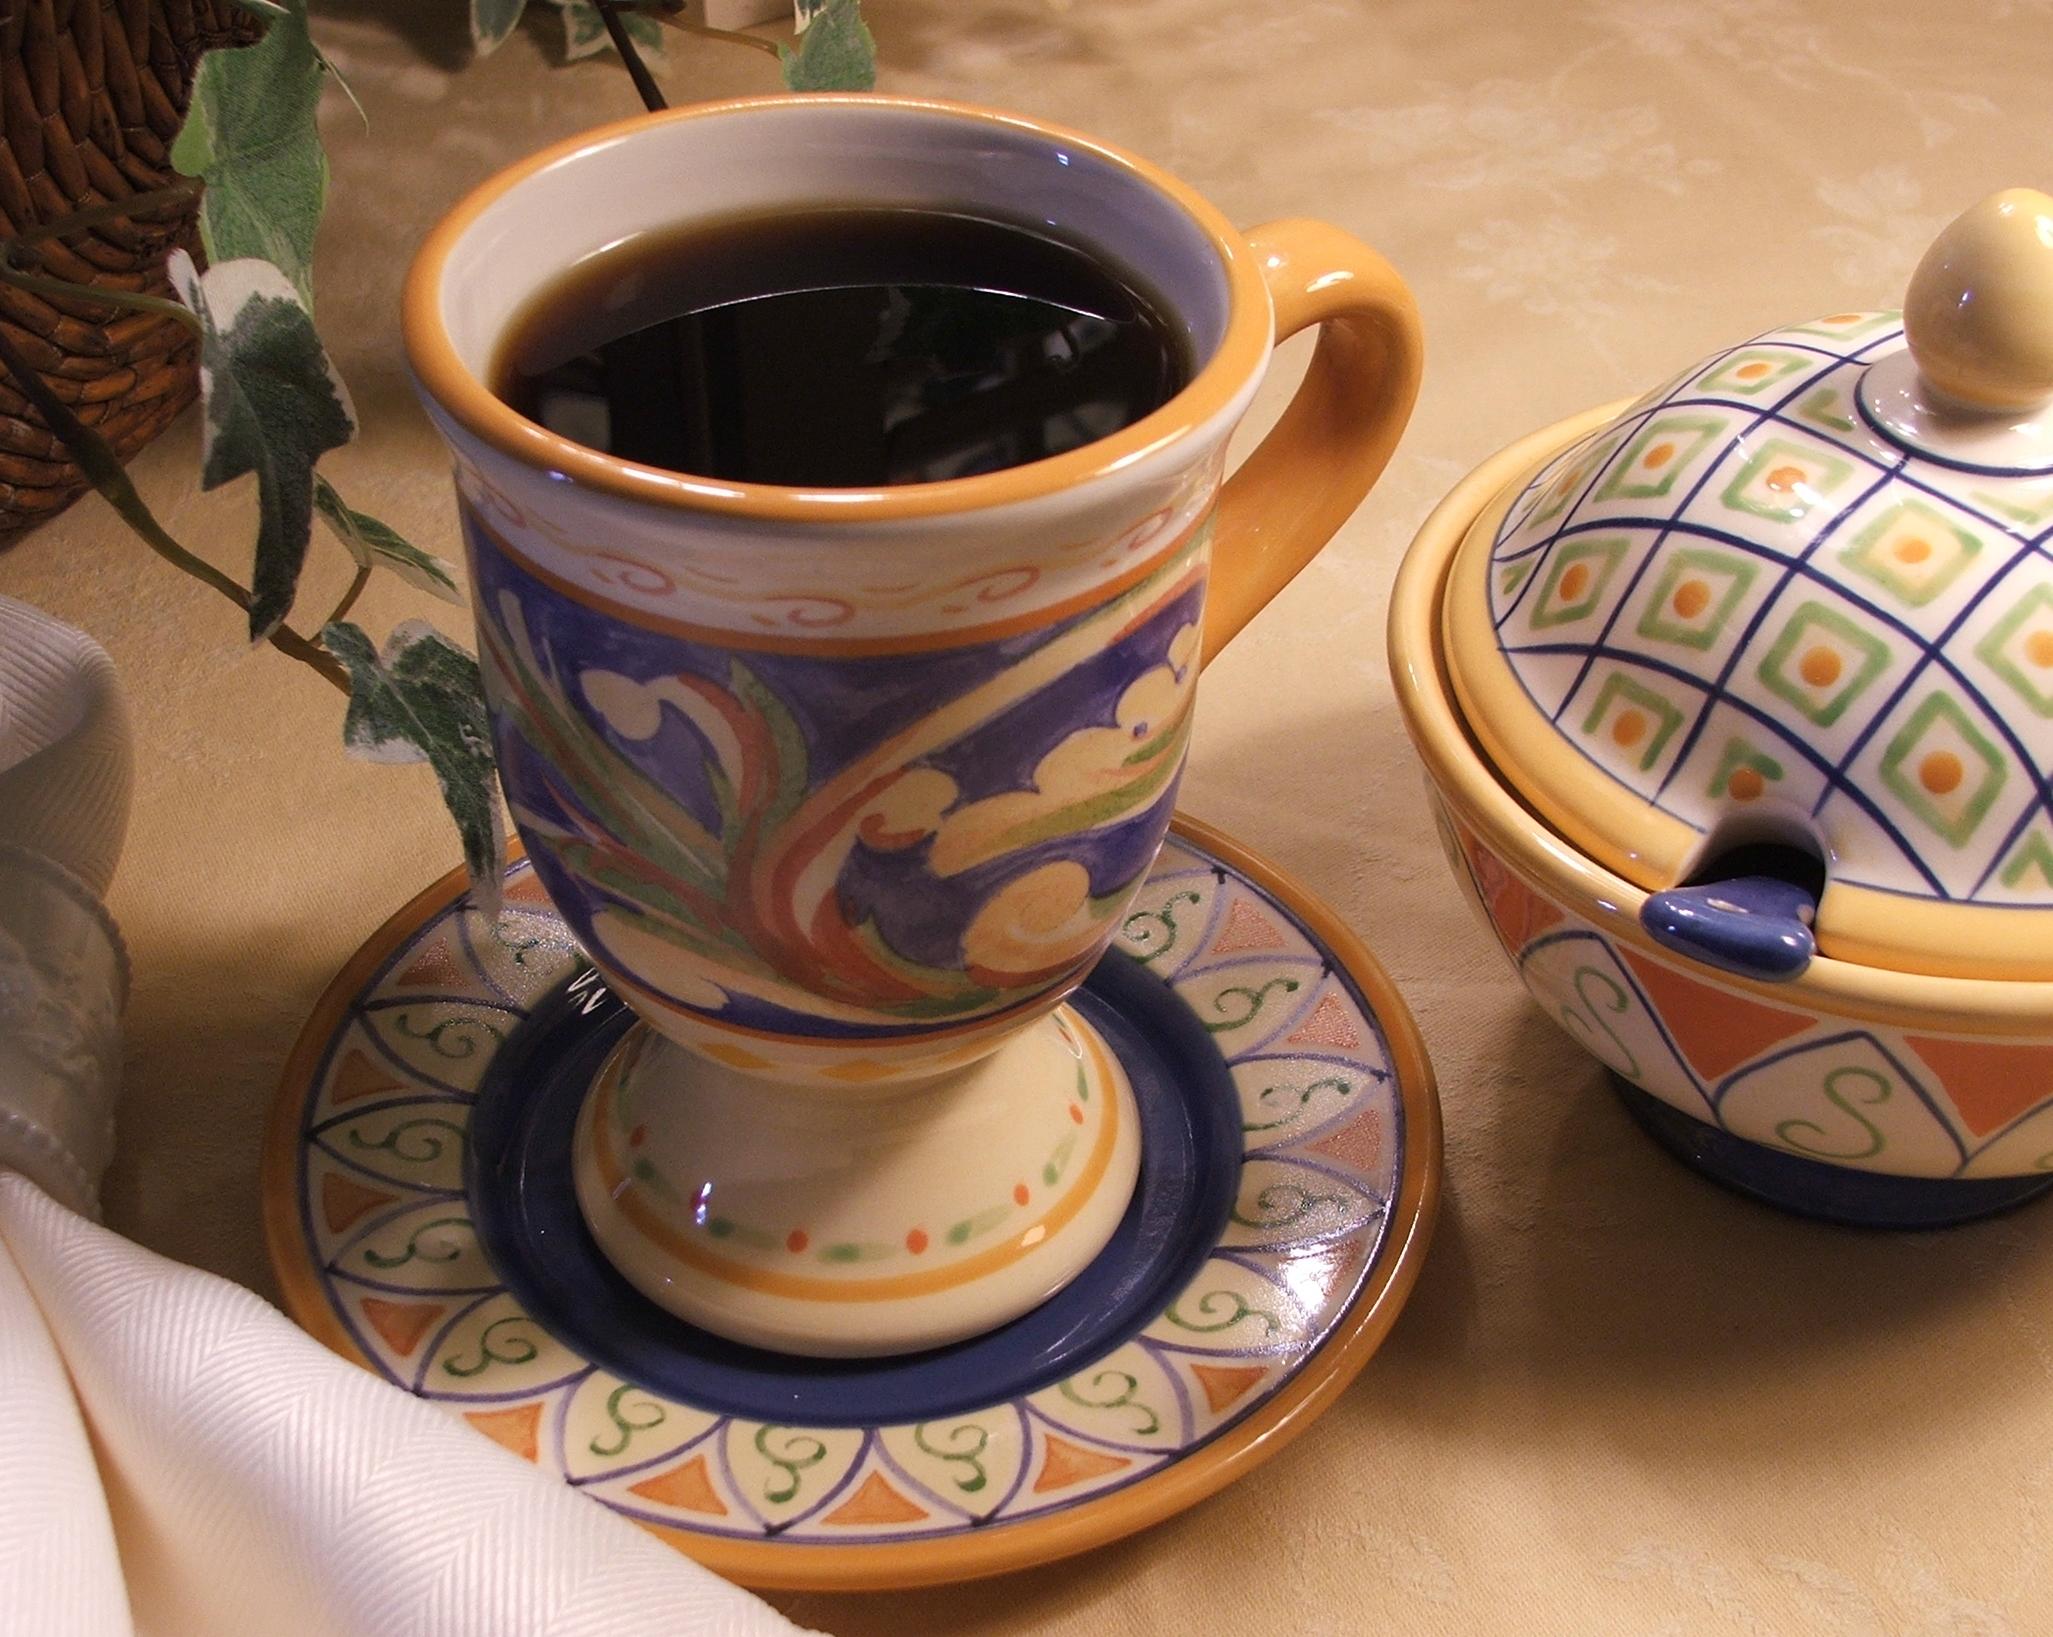  Wake up your senses with the bold aroma and flavor of Turkish coffee